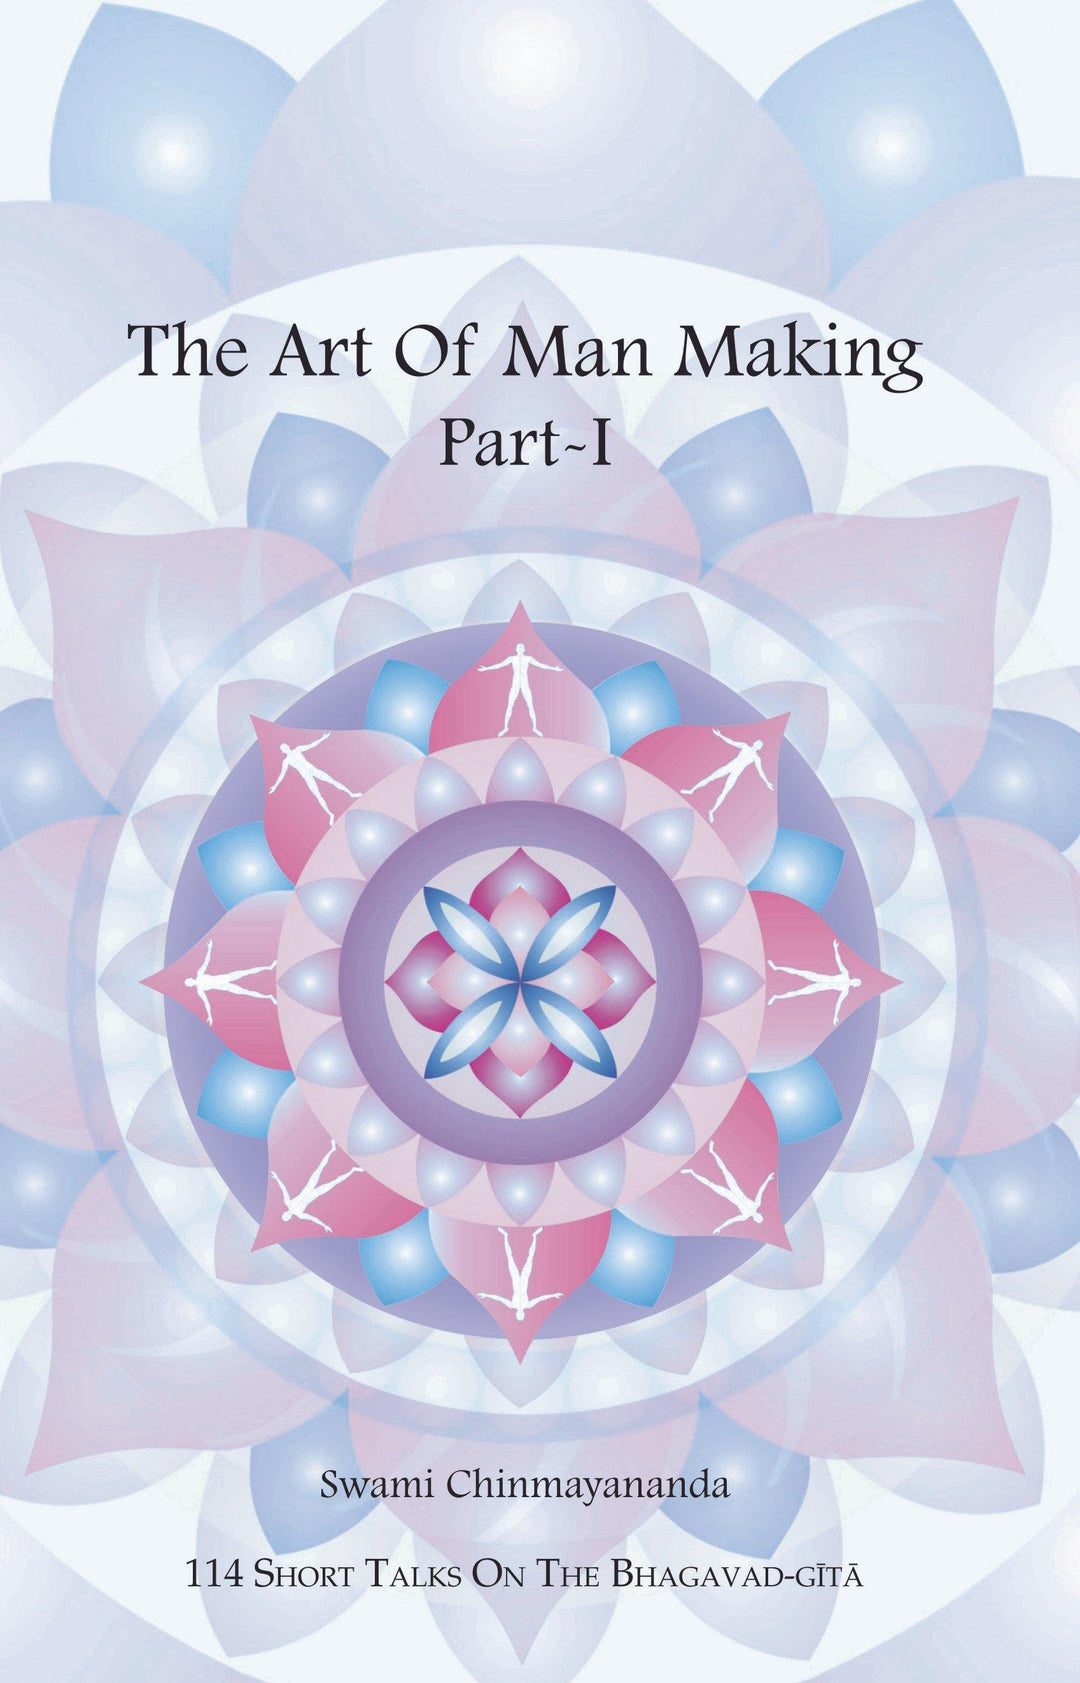 The Art of Man Making-Part~1